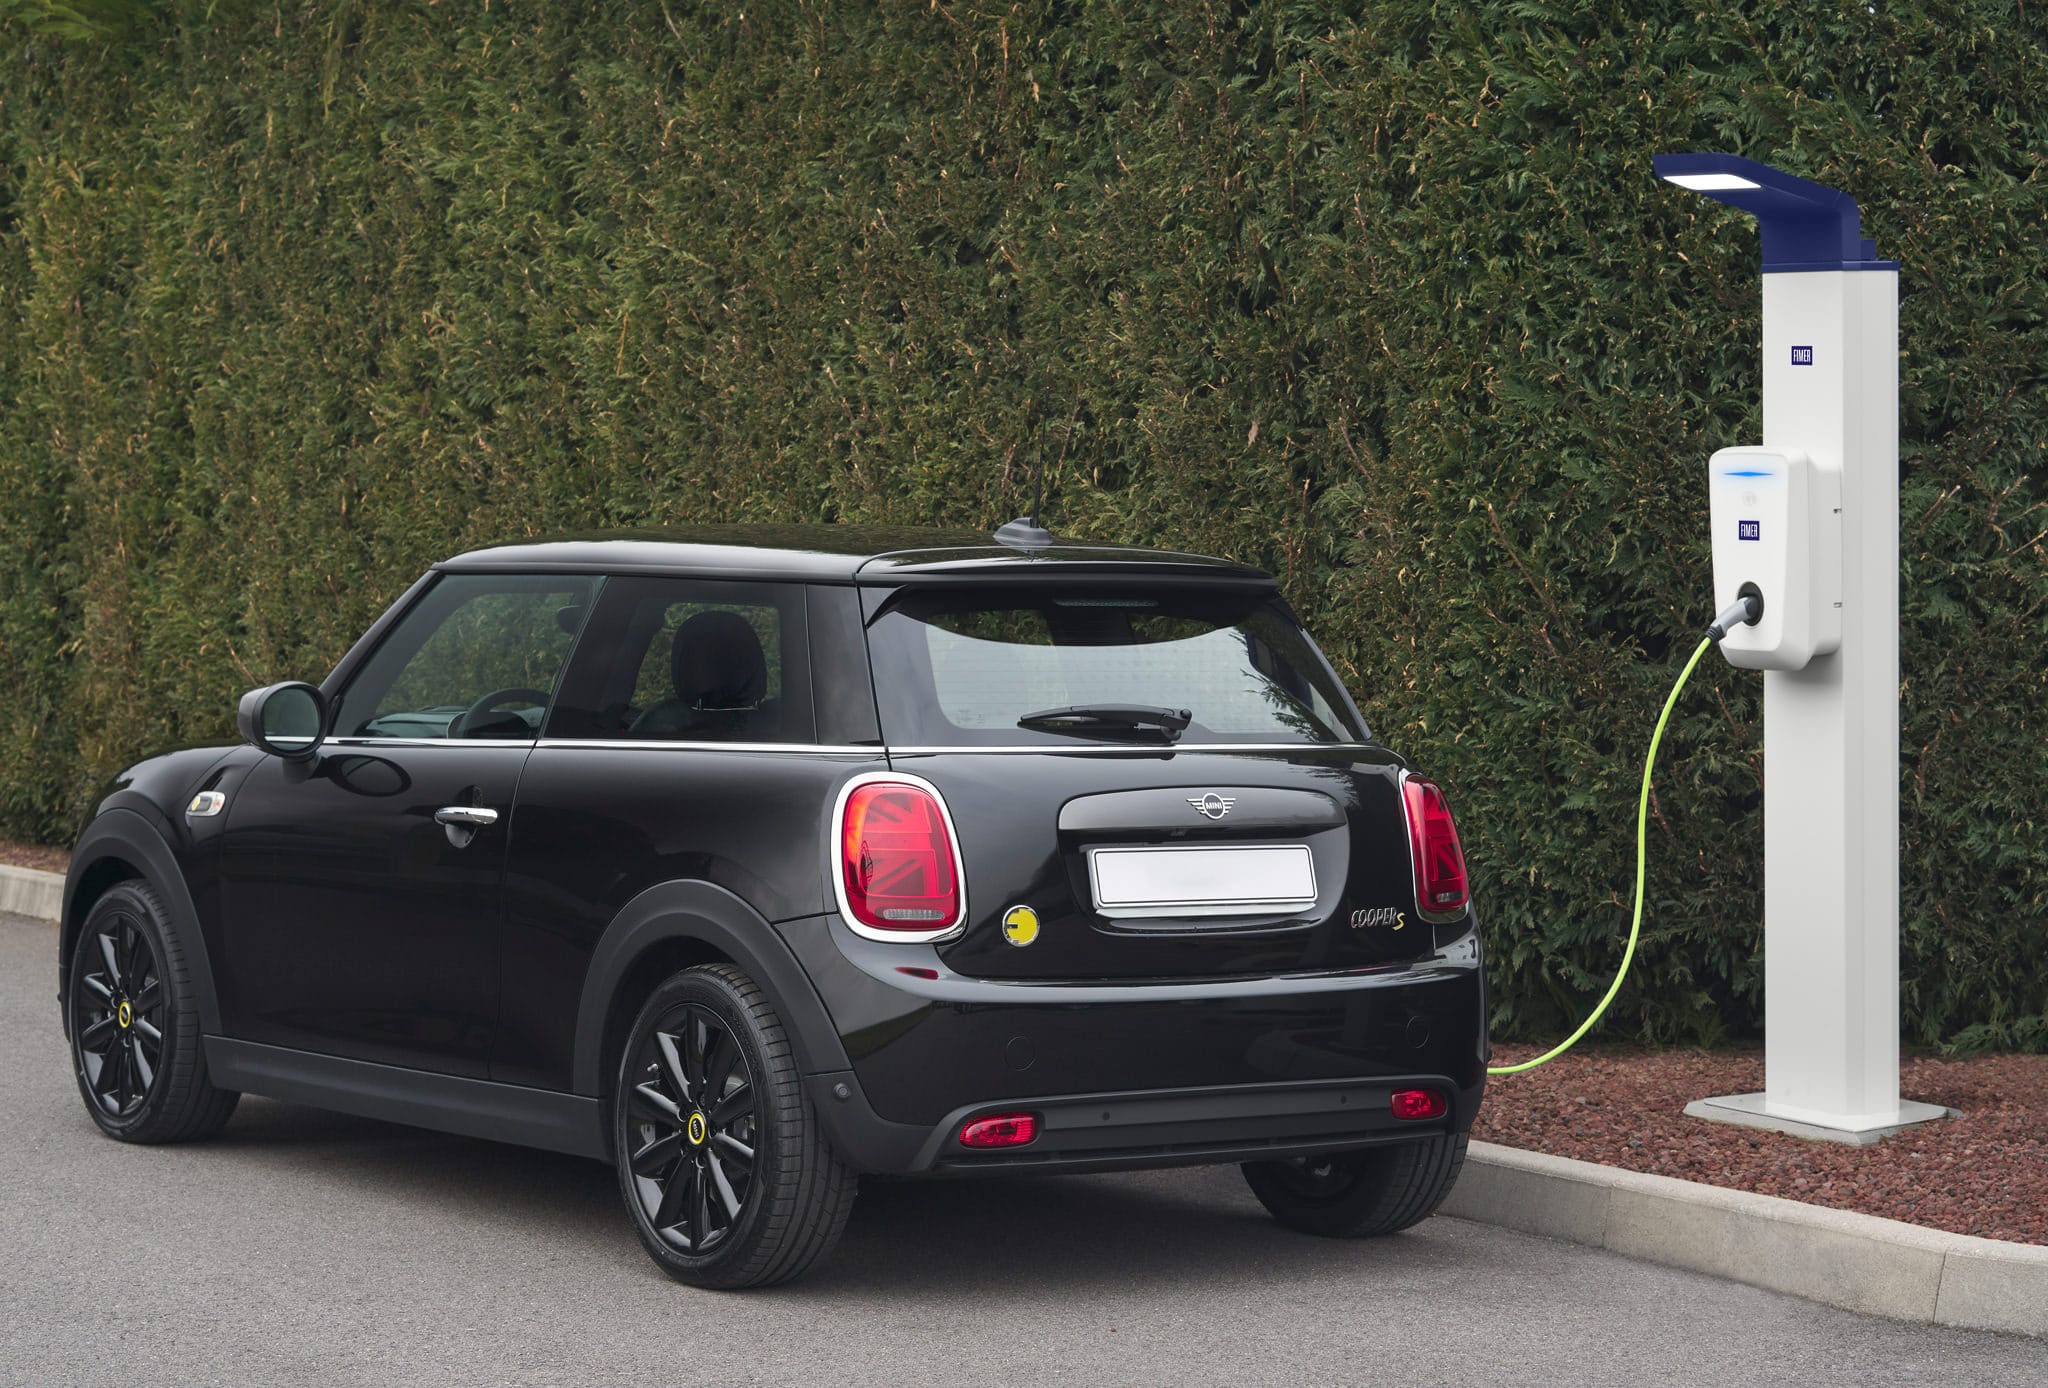 How does EV charging work?